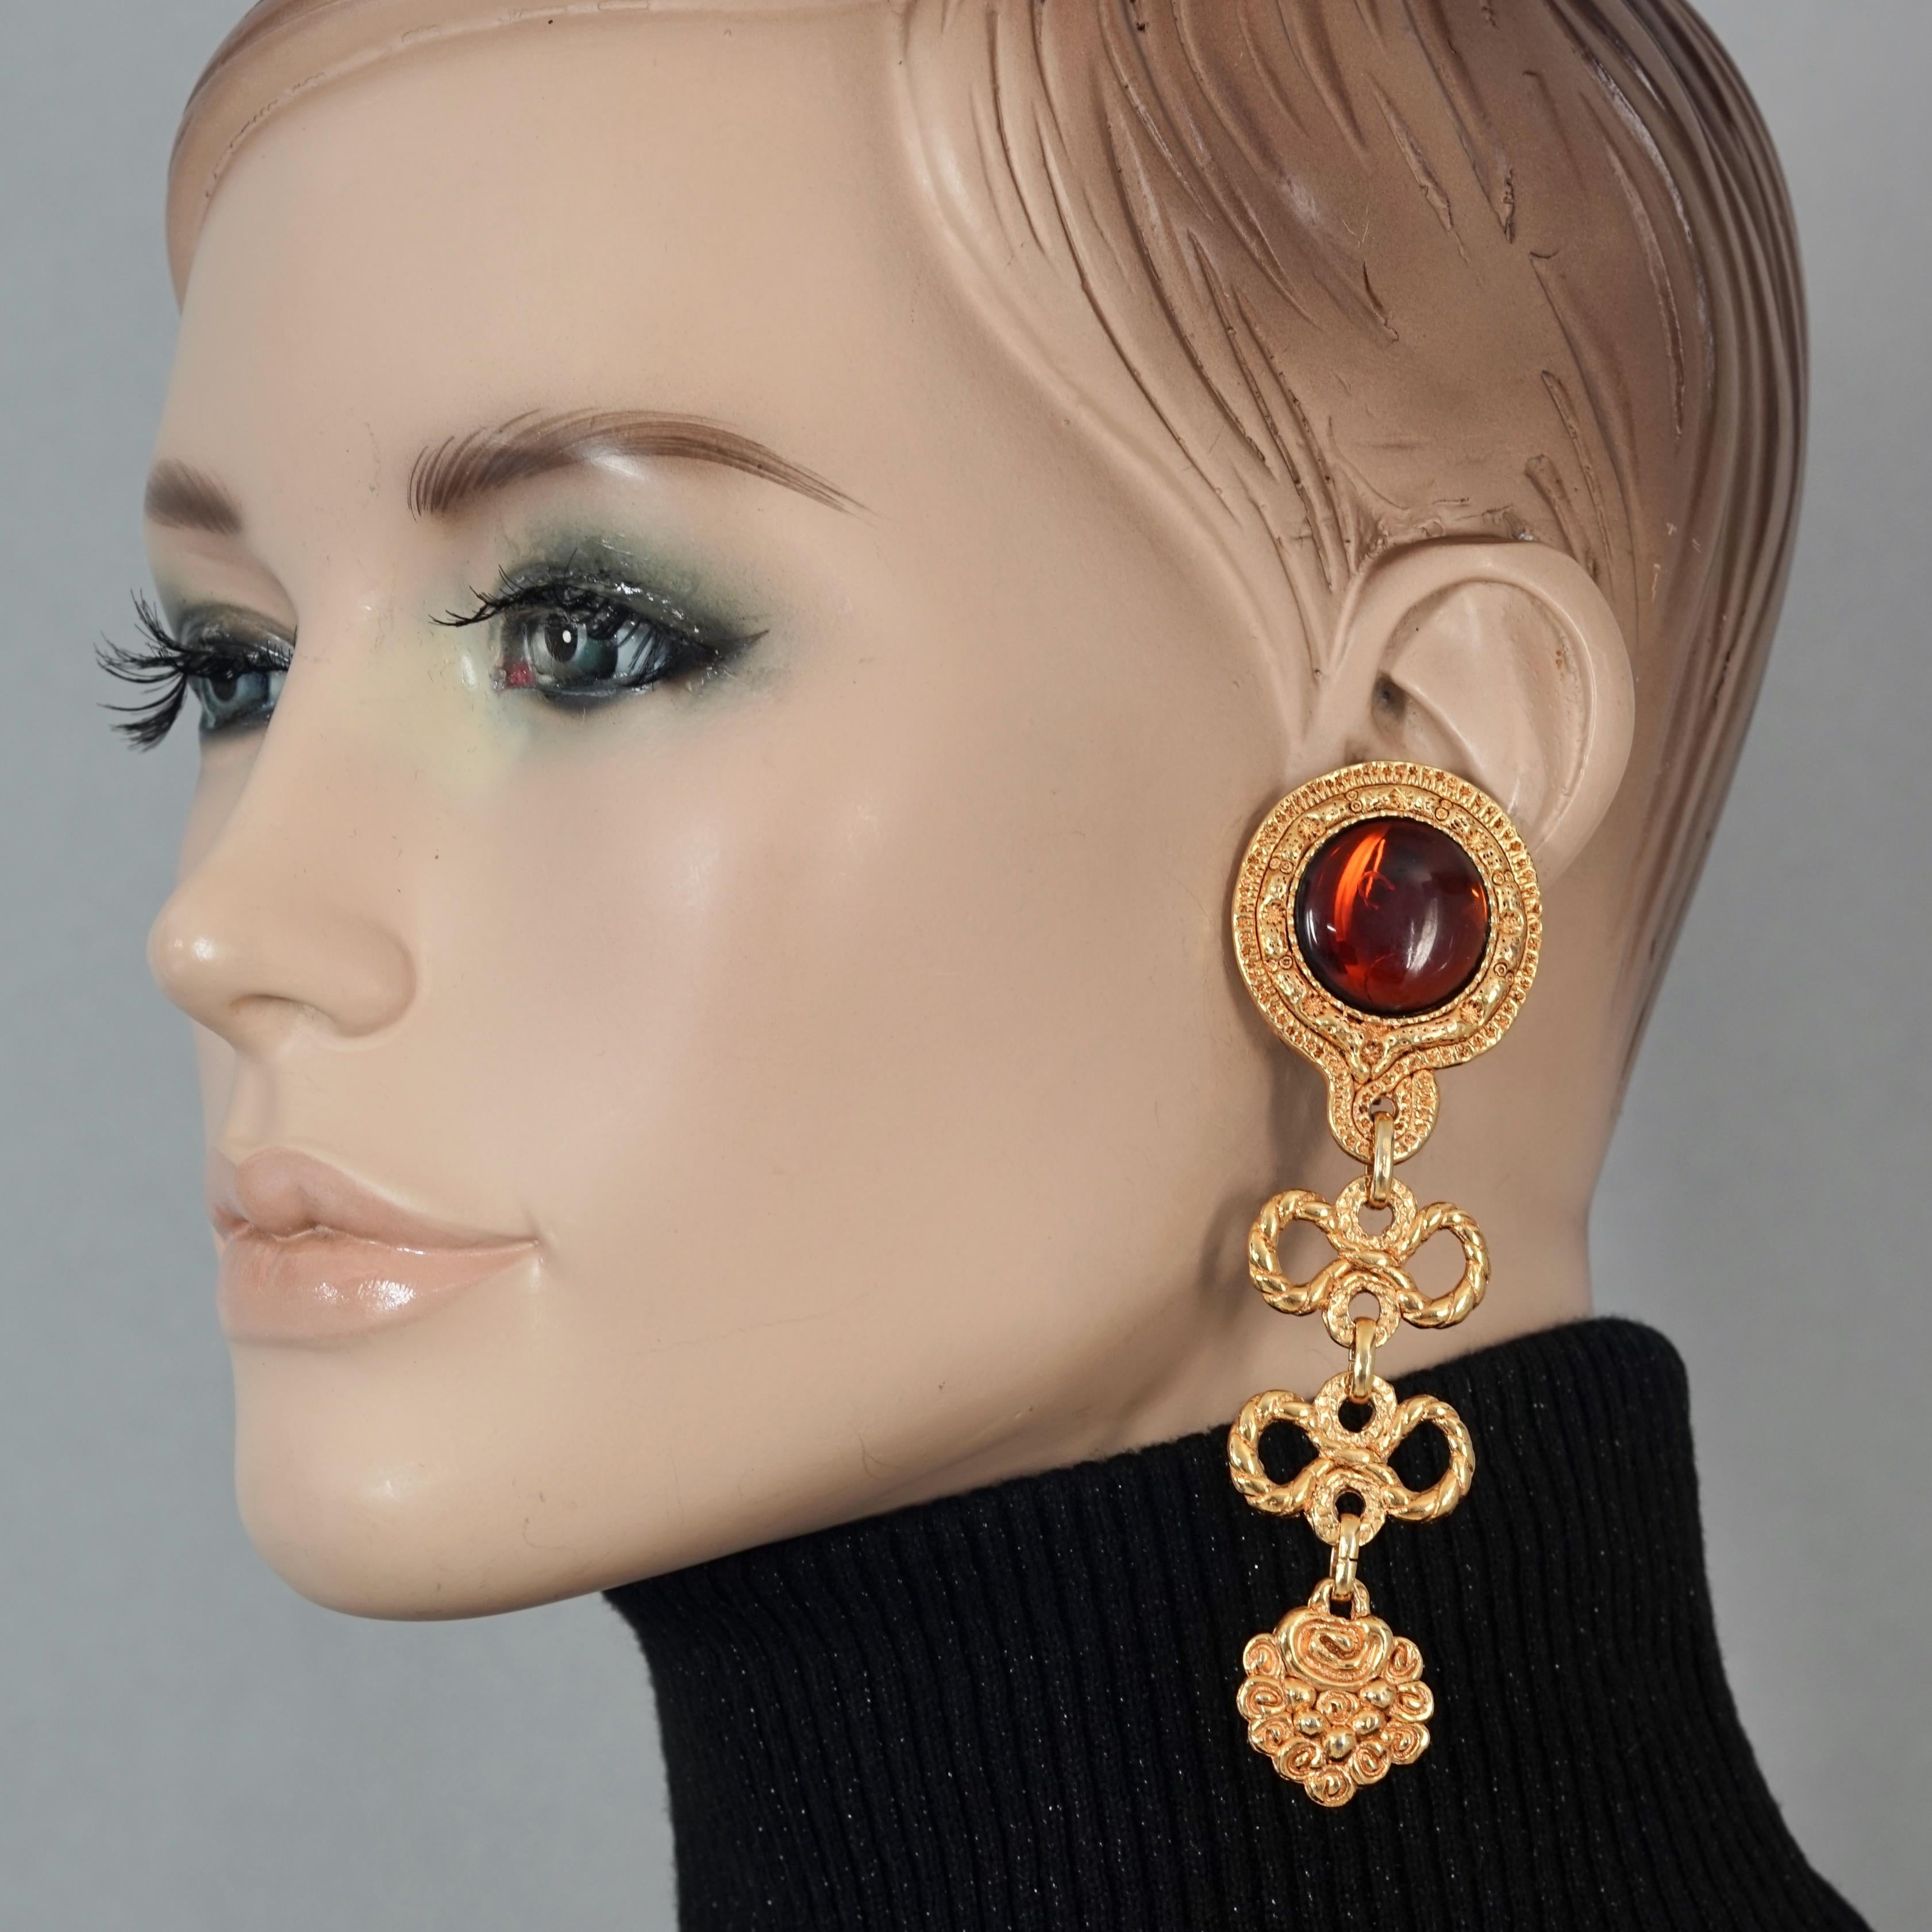 Vintage French Baroque Red Cabochon Tiered Bows Dangling Earrings

Measurements:
Height: 4.13 inches (10.5 cm)
Width: 1.29 inches (3.3 cm)
Weight per Earring: 21 grams

Features:
- French Baroque style earrings with red cabochon accent and tiered